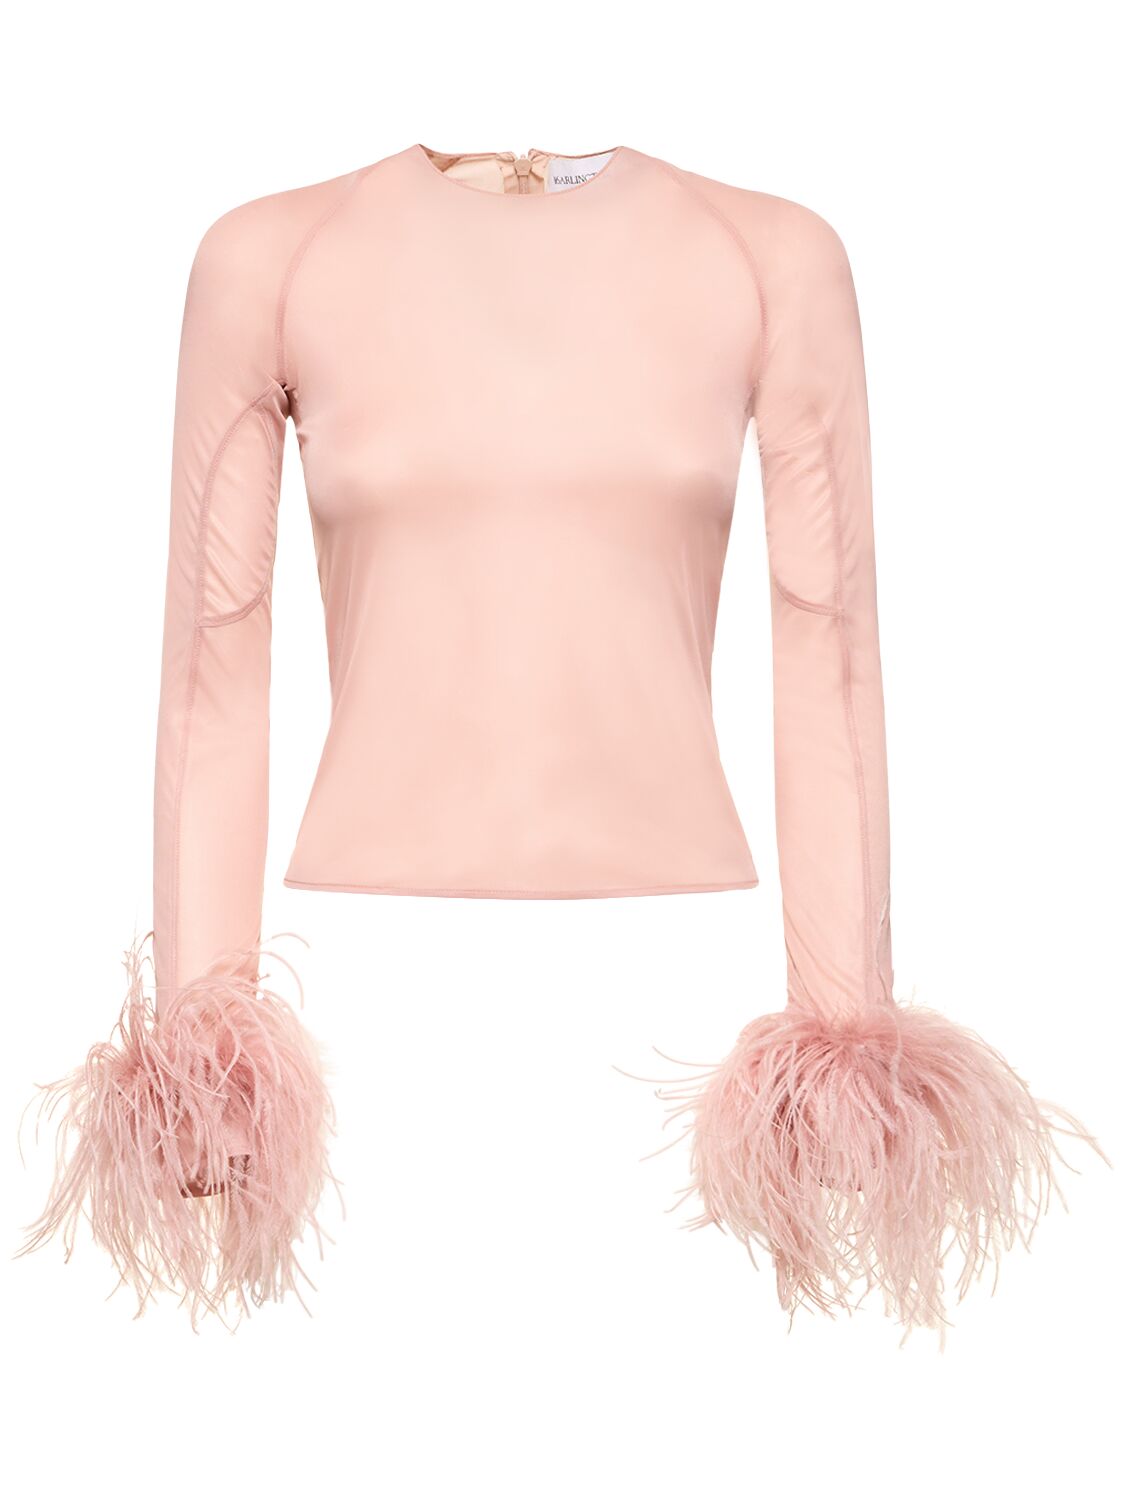 Image of Alero Jersey Crop Top W/ Feathers